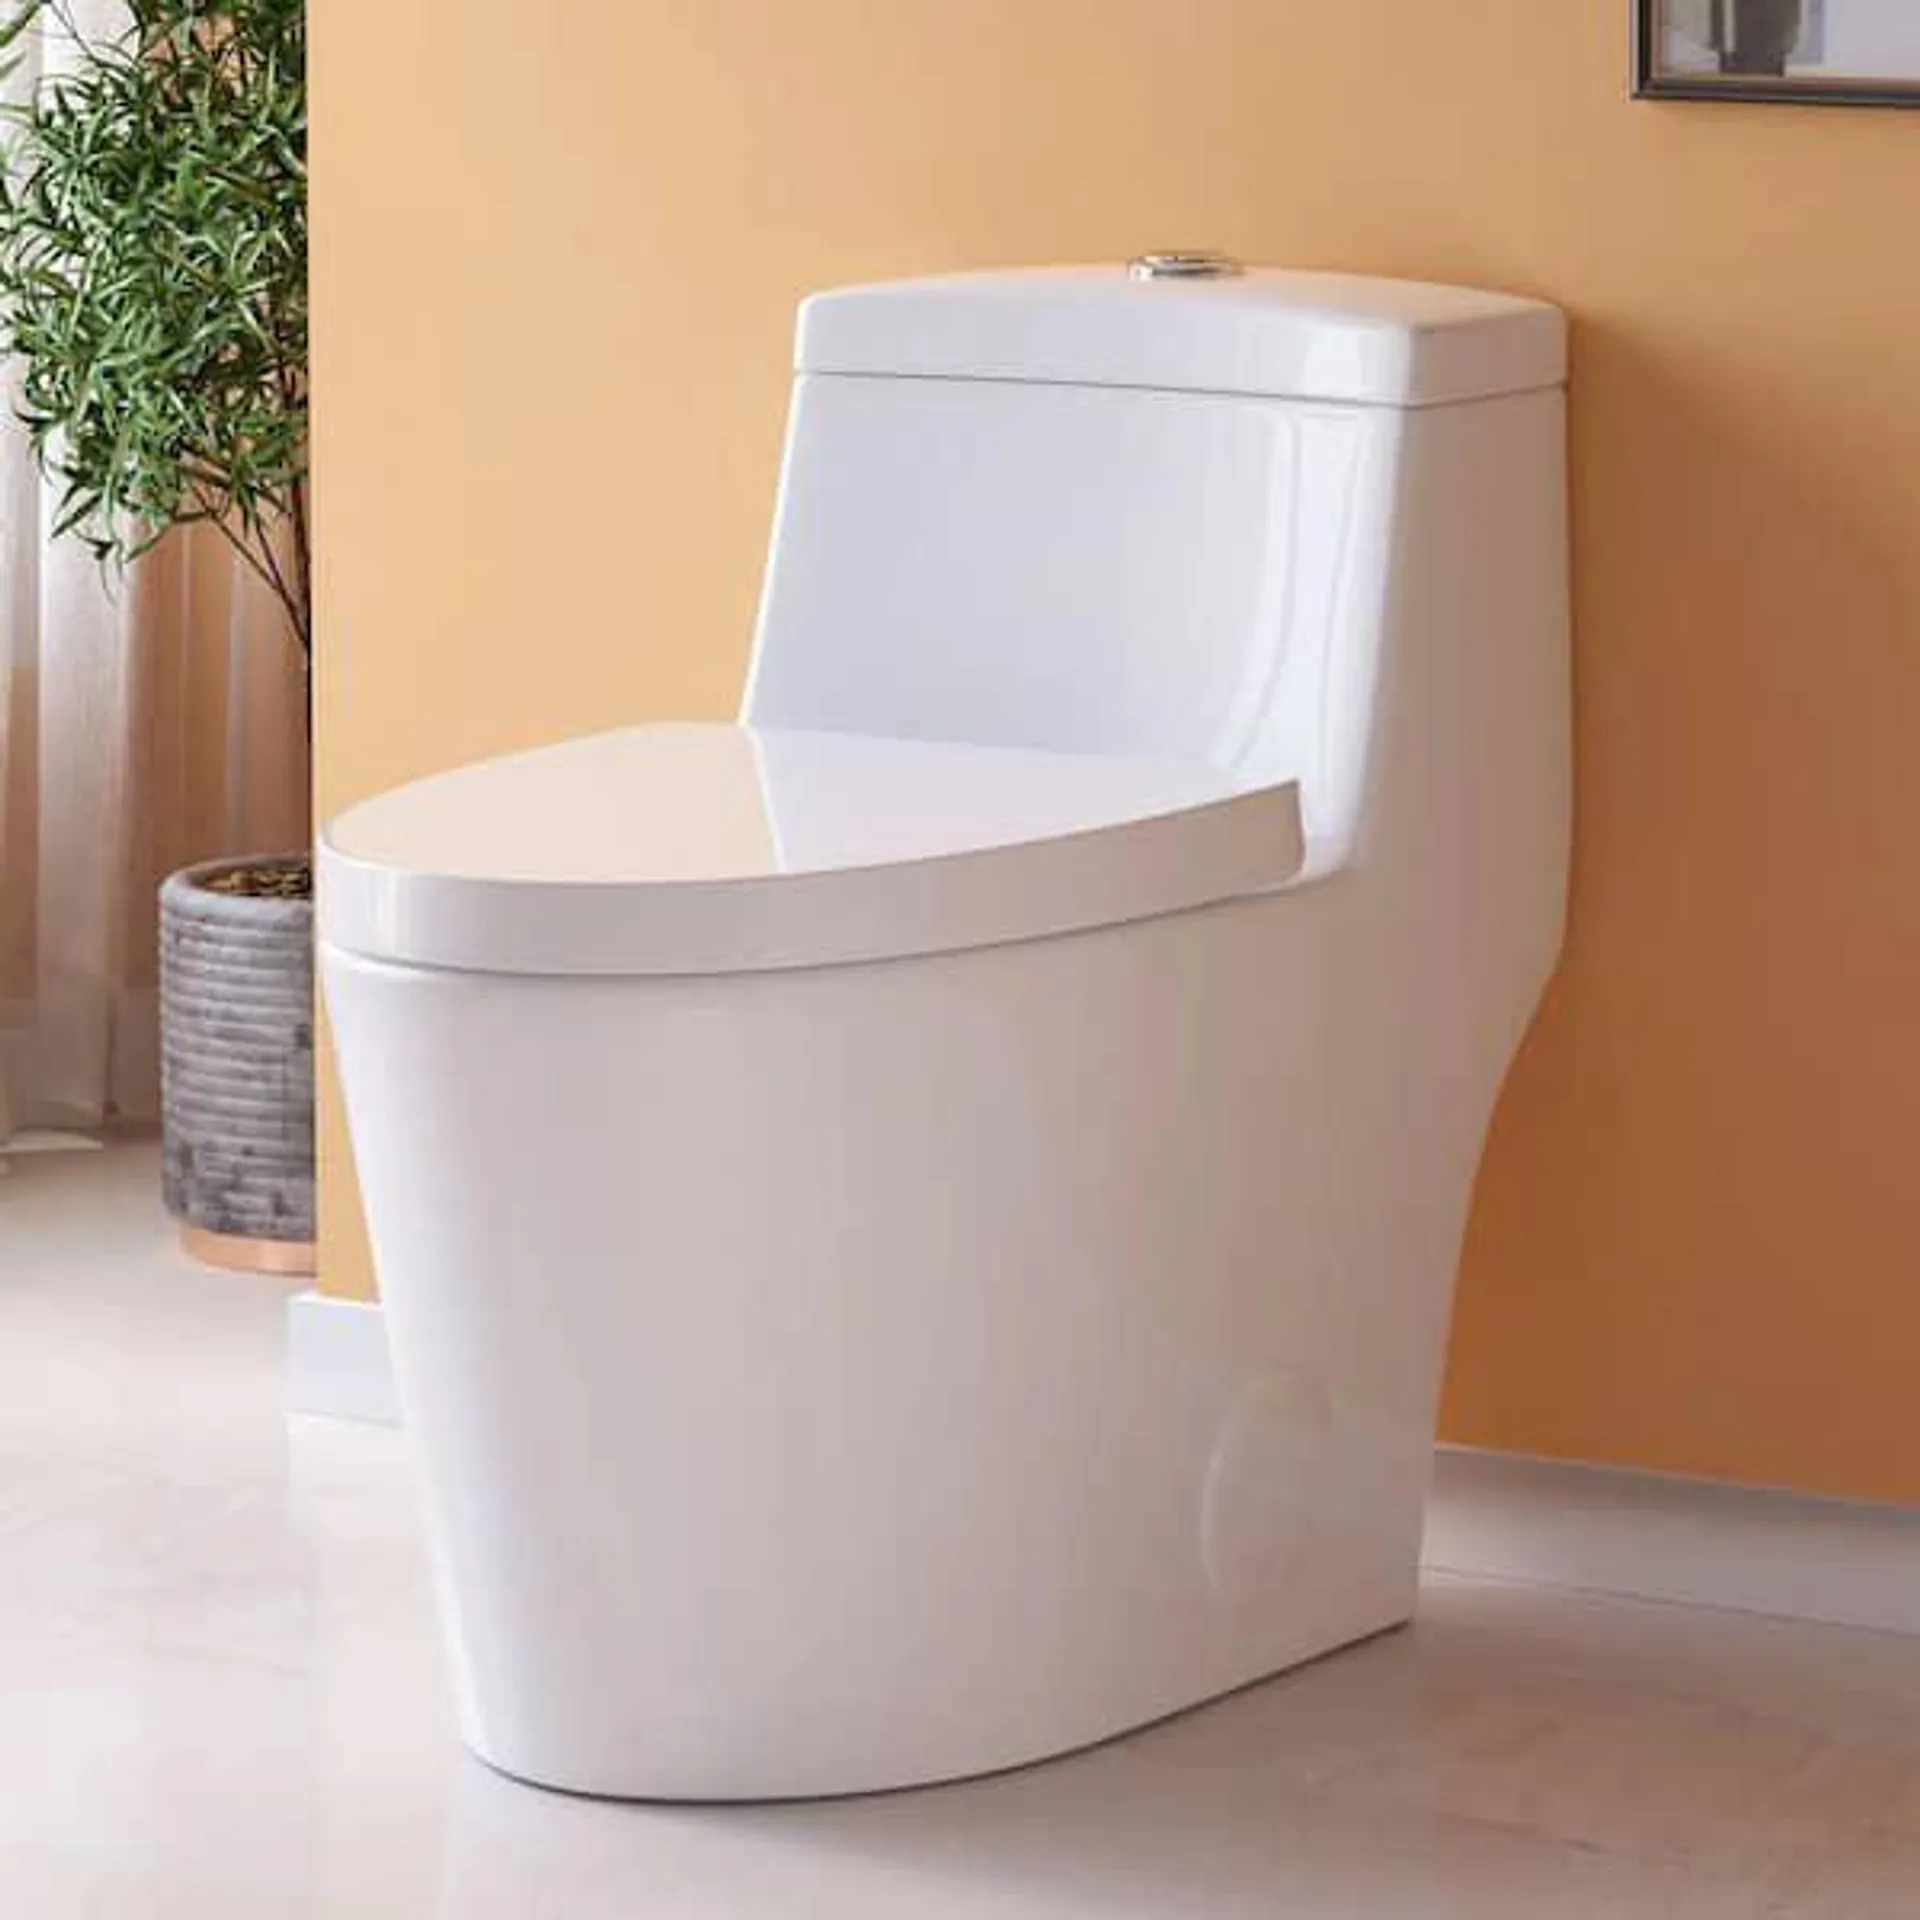 1-piece 0.8/1.28 GPF Dual Flush Elongated Toilet in White, Seat Included